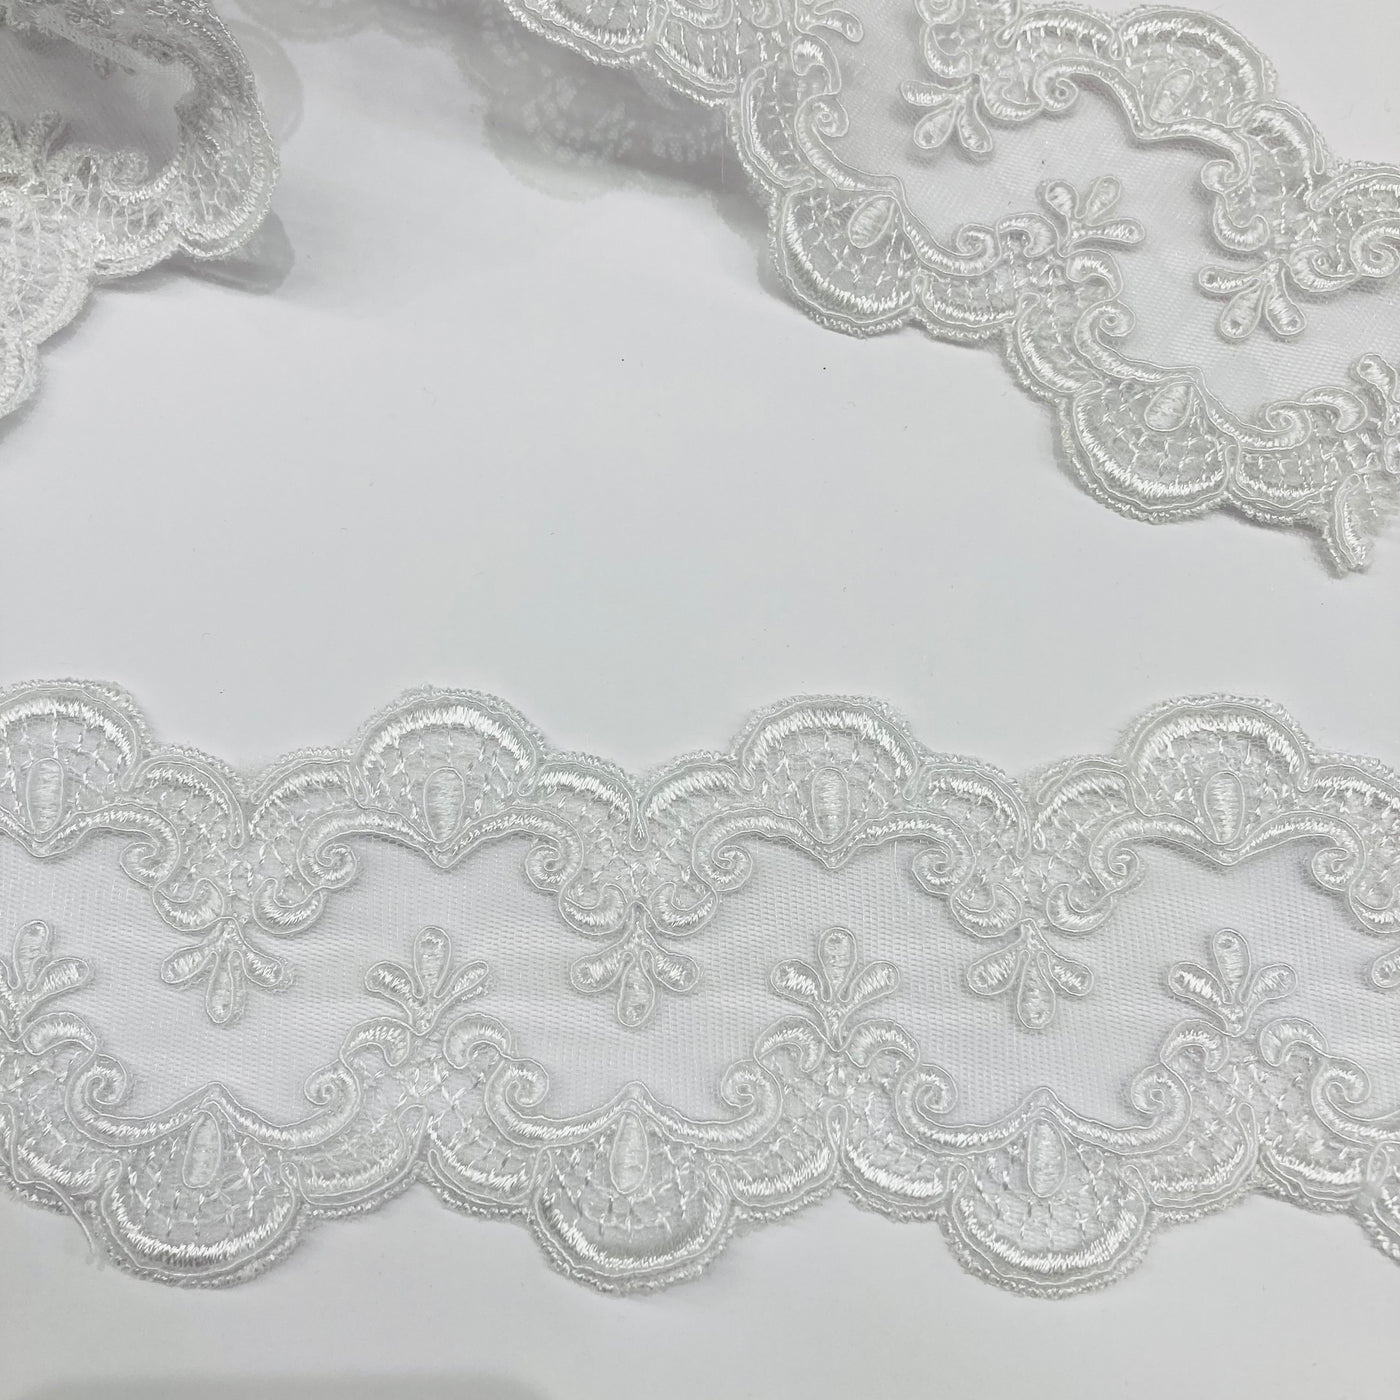 Corded & Embroidered Double Sided White Trimming on Mesh Net Lace. Lace USA